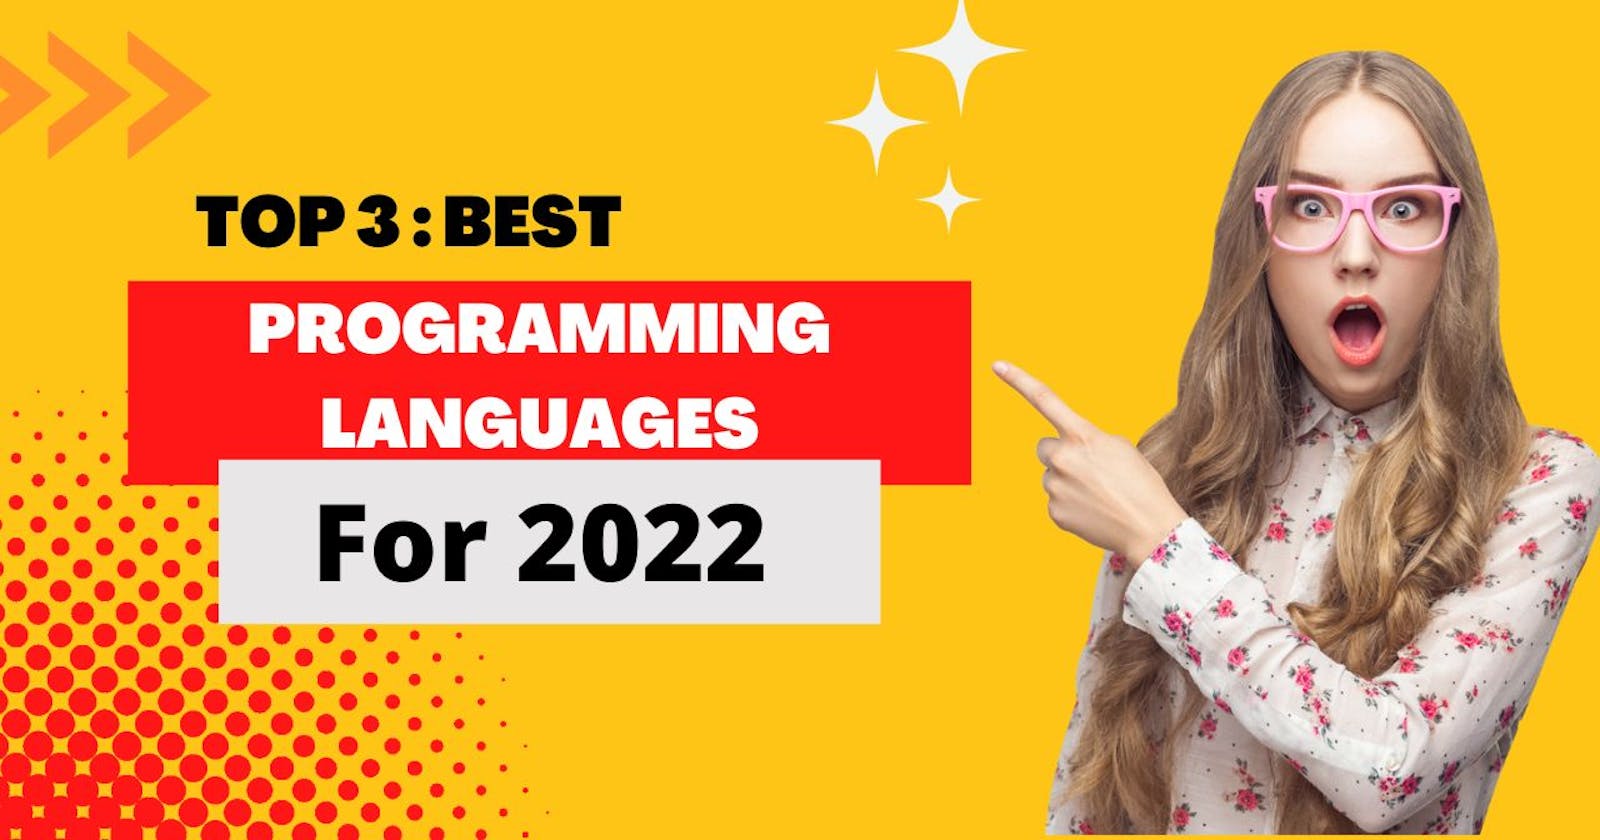 TOP 3: Best Programming languages for 2022